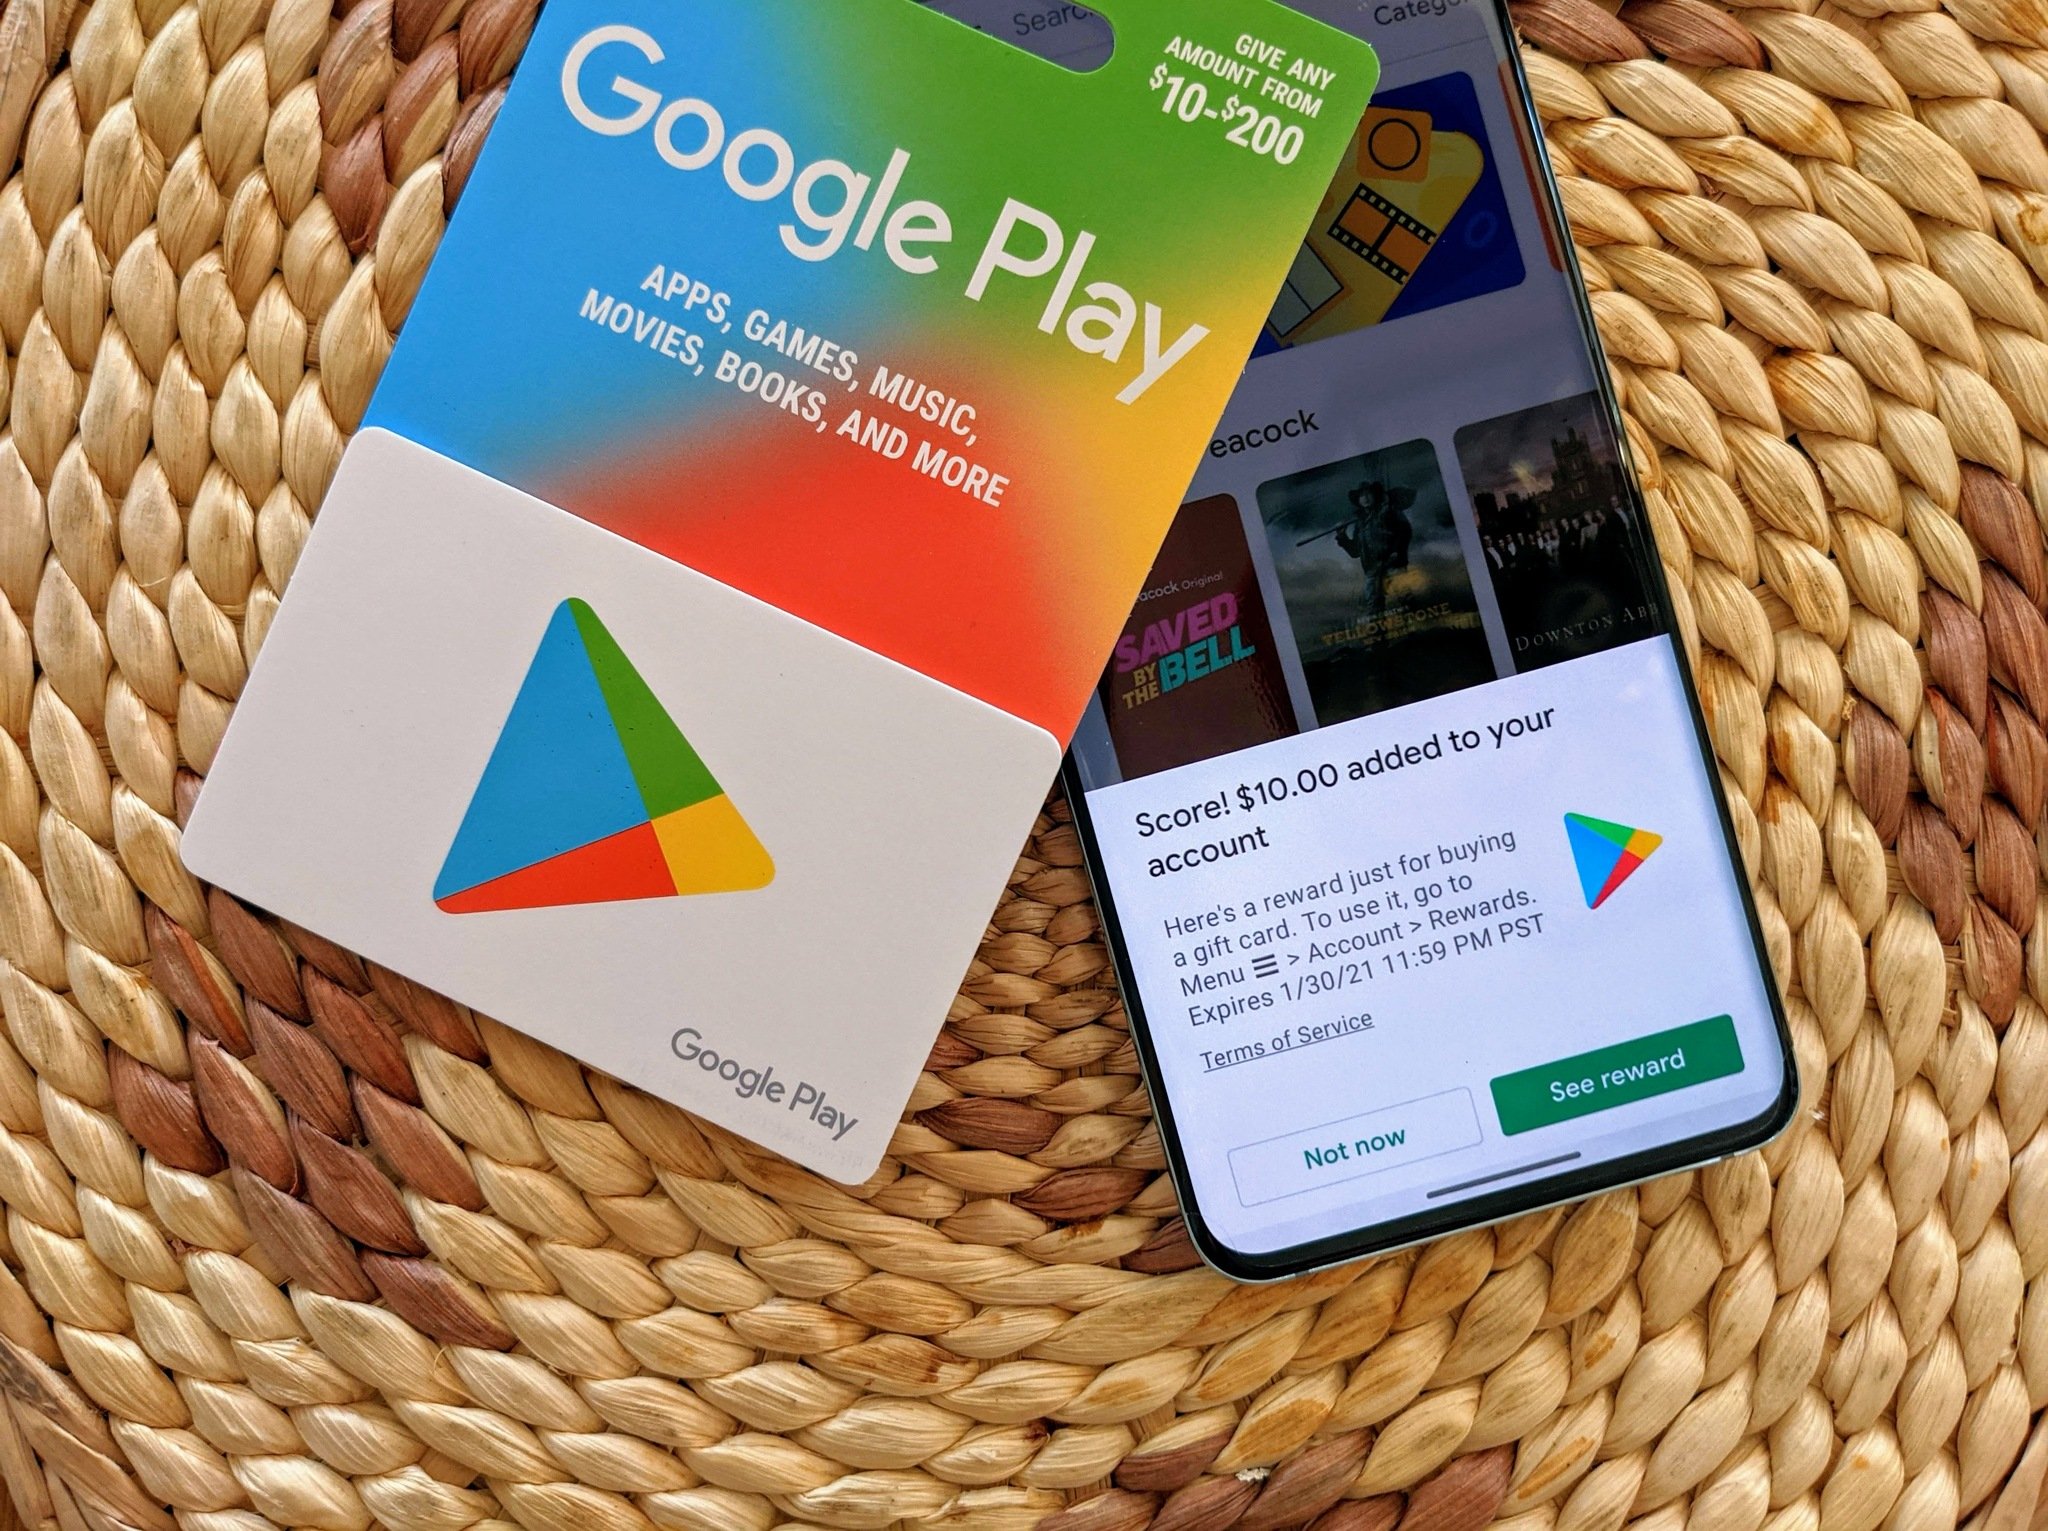 How Do I Purchase a Google Play Gift Card 